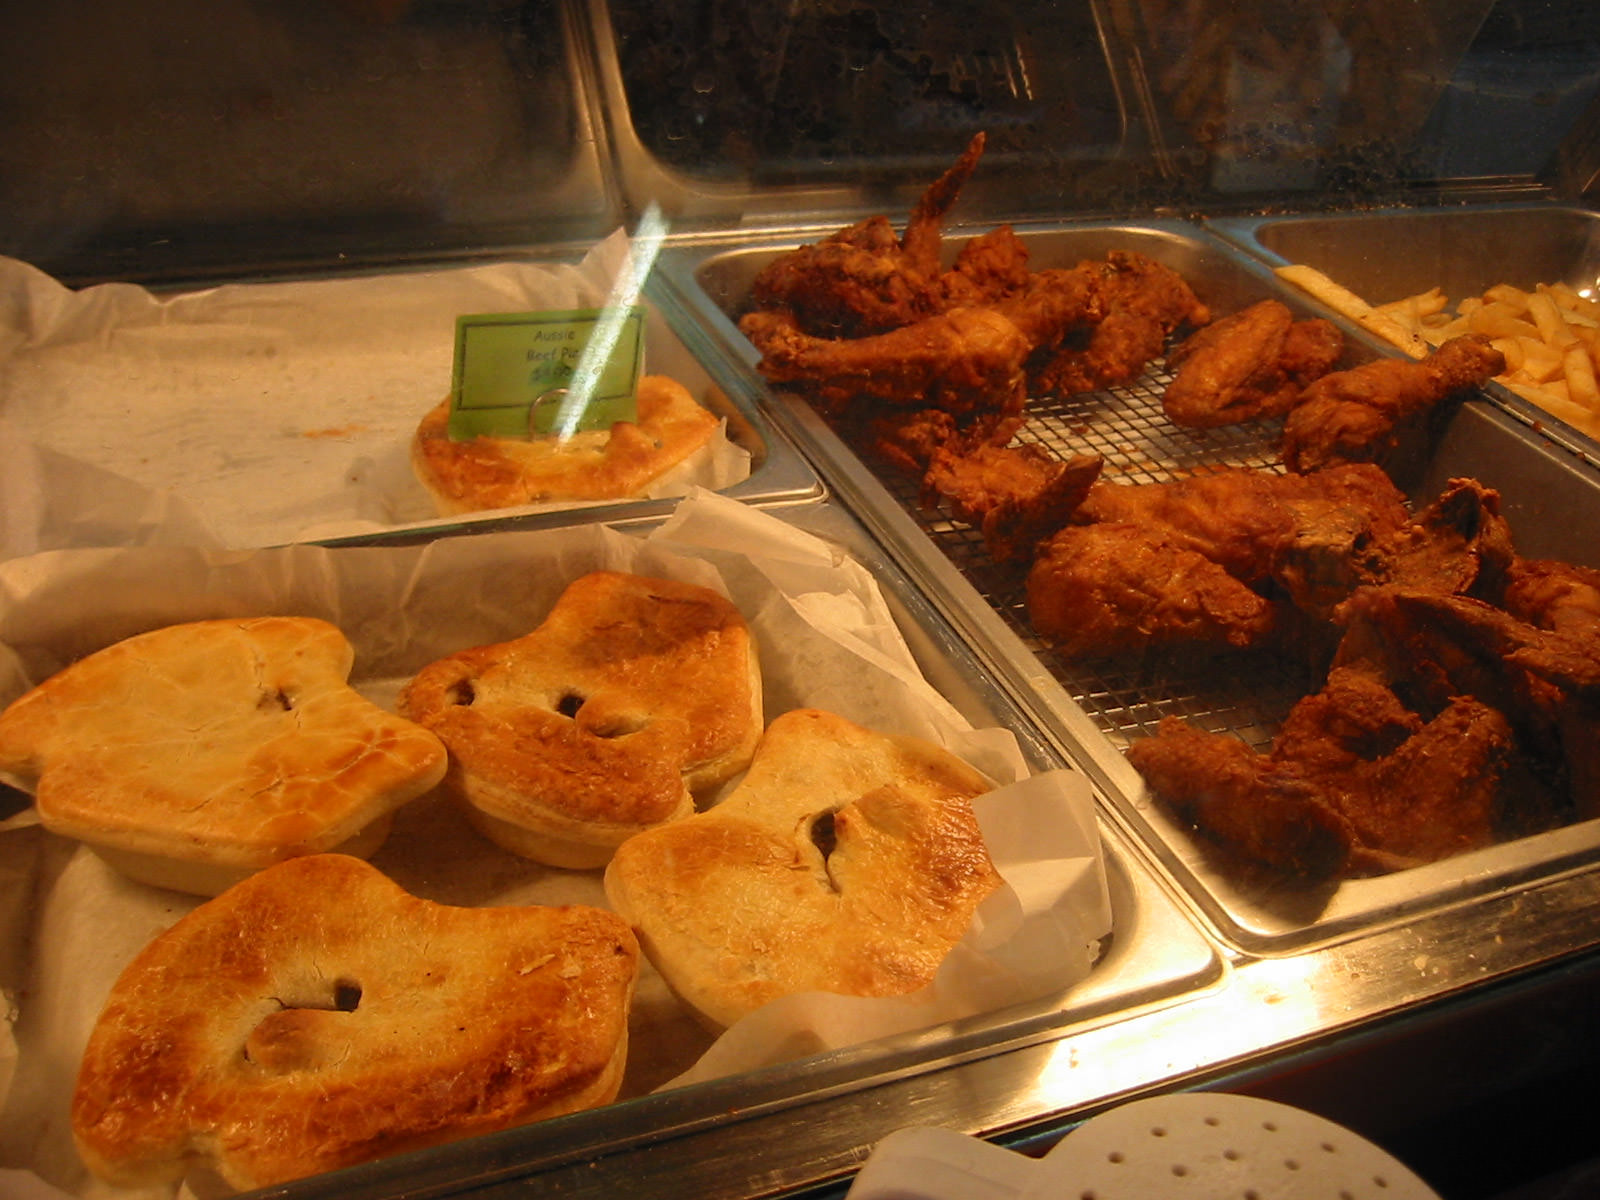 Aussie meat pies and Country Fried Chicken